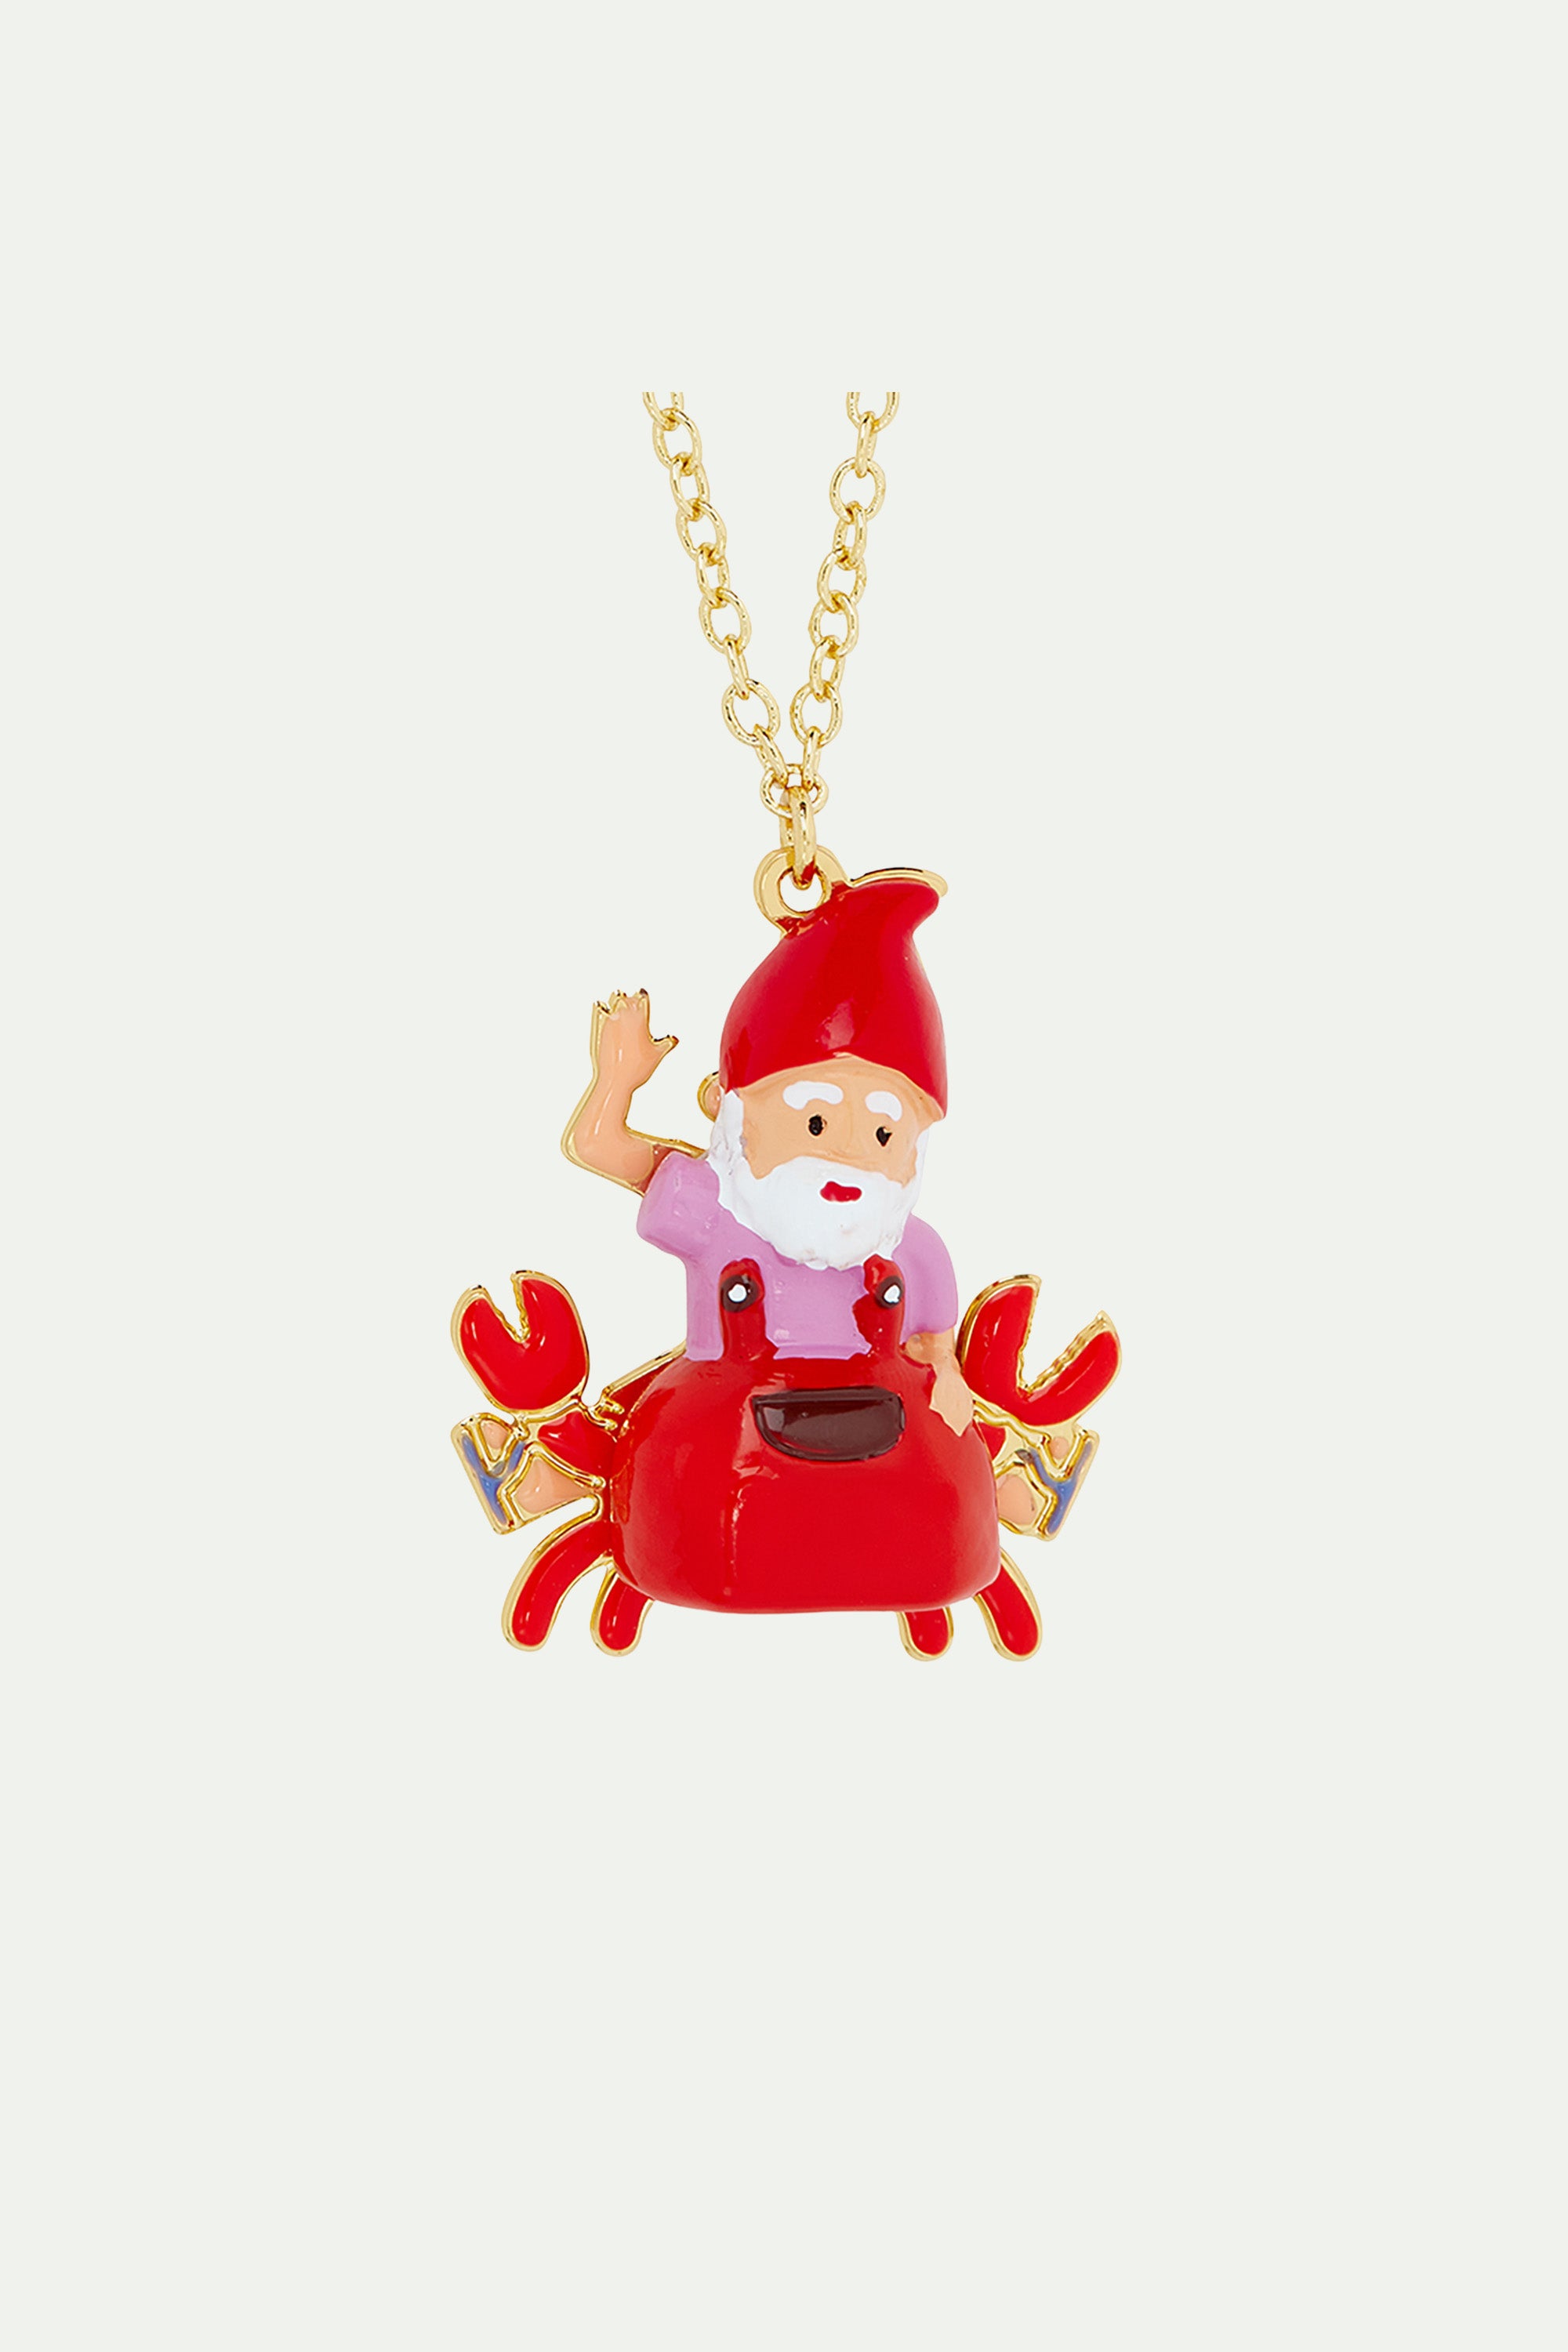 Garden gnome and red crab pendant necklace